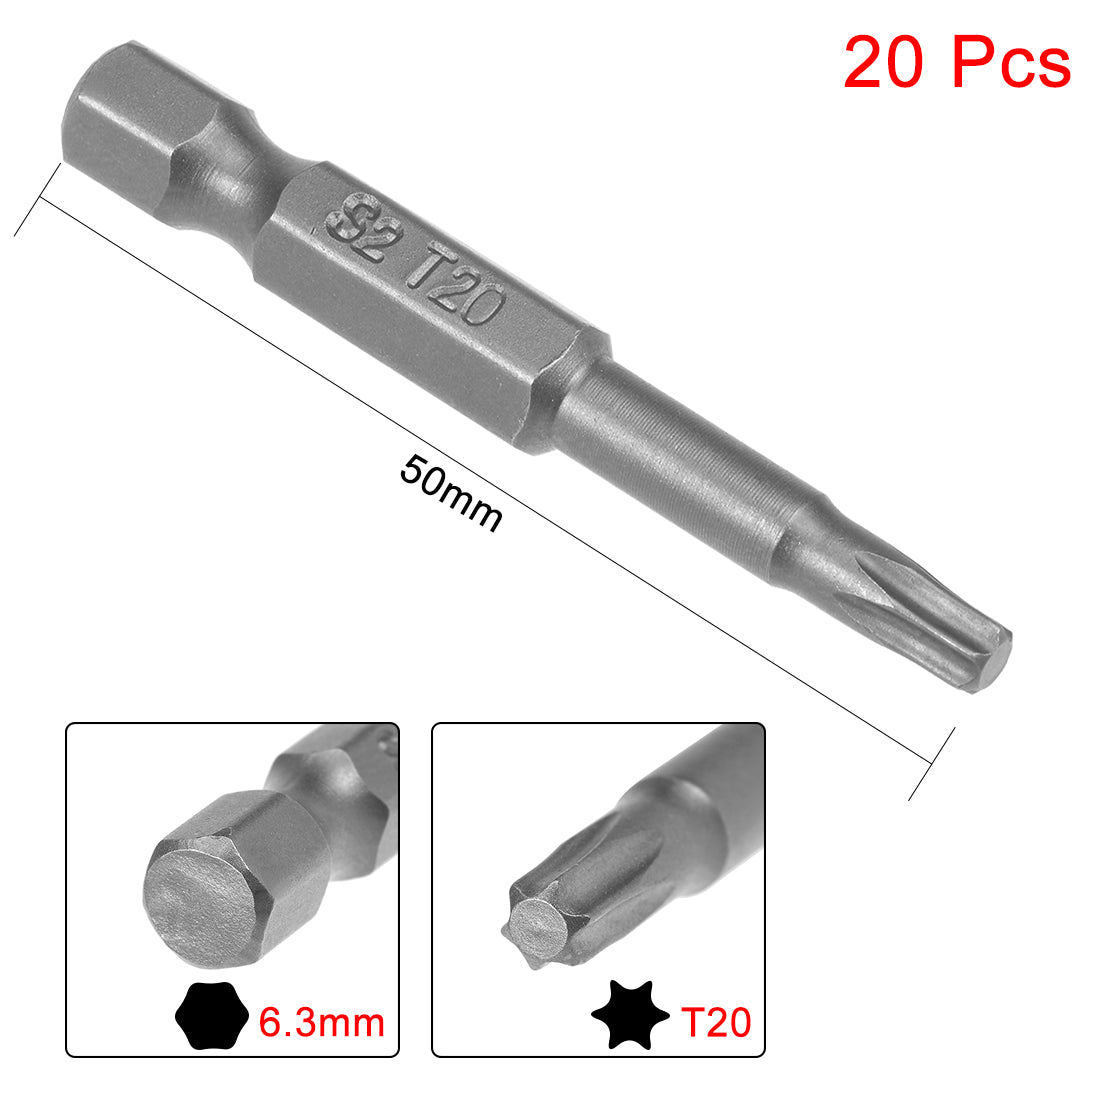 uxcell Uxcell Magnetic Torx Screwdriver Bits, Hex Shank S2 Power Tools